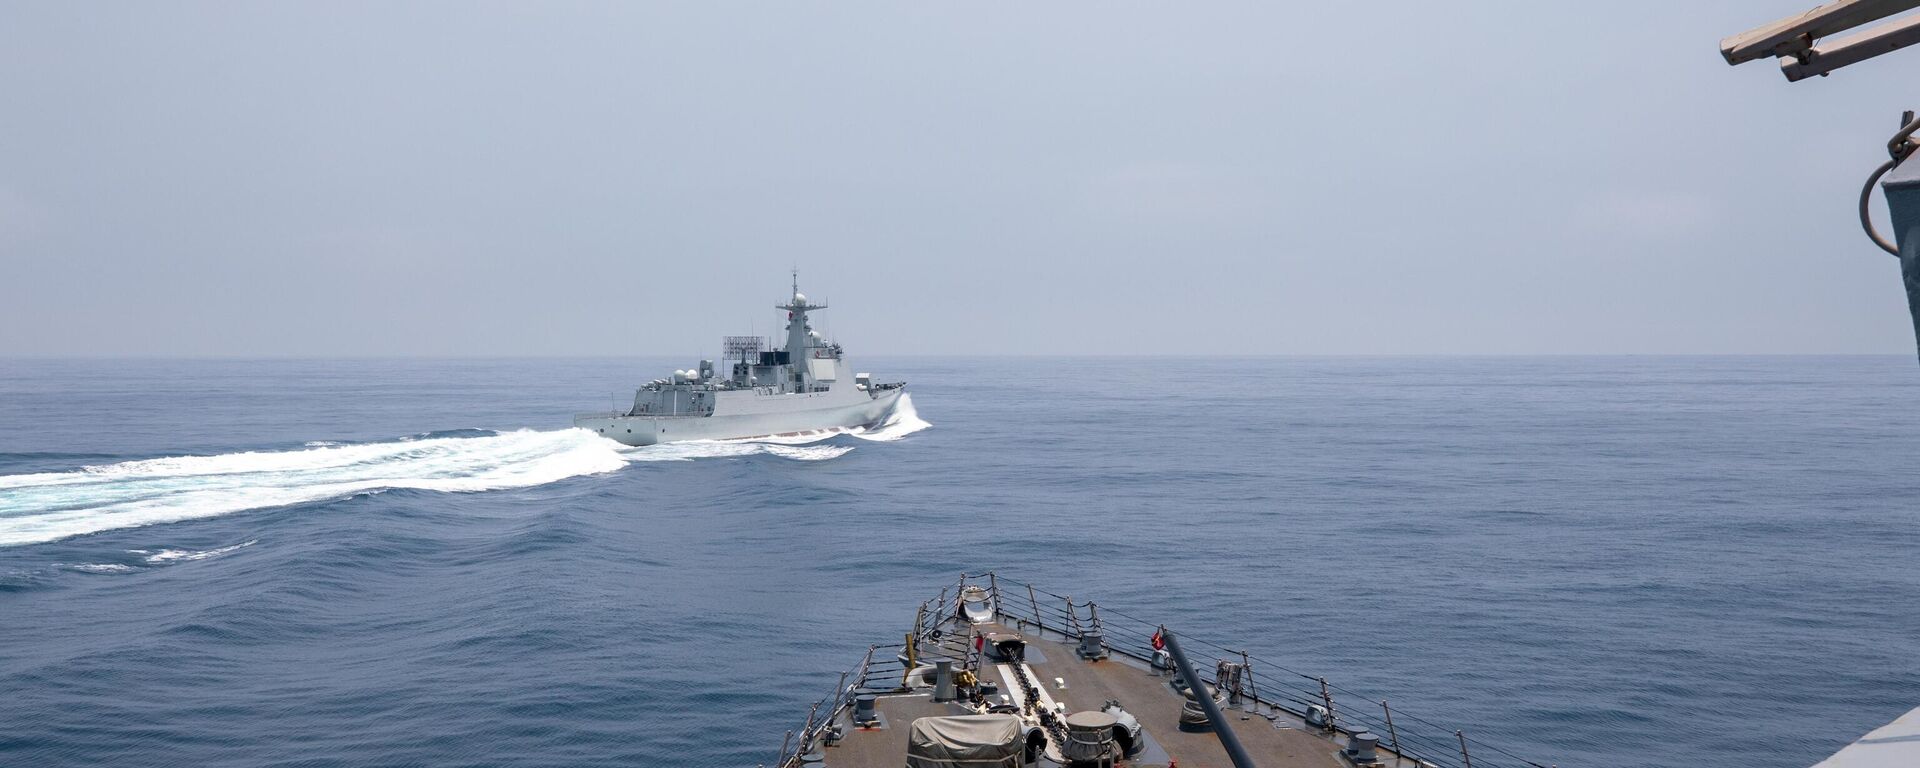 The Arleigh Burke-class guided-missile destroyer USS Chung-Hoon (DDG 93) observes PLA(N) LUYANG III DDG 132 (PRC LY 132) execute maneuvers in an unsafe manner while conducting a routine south to north Taiwan Strait transit alongside the Halifax-class frigate HMCS Montreal (FFG 336), June 3. USS Chung-Hoon is on a routine deployment to U.S. 7th Fleet and is assigned to Commander, Task Force (CTF 71)/ Destroyer Squadron (DESRON) 15. CTF 71/DESRON 15 is the largest forward-deployed DESRON and the U.S. 7th Fleet’s principal surface force. - Sputnik International, 1920, 01.08.2023